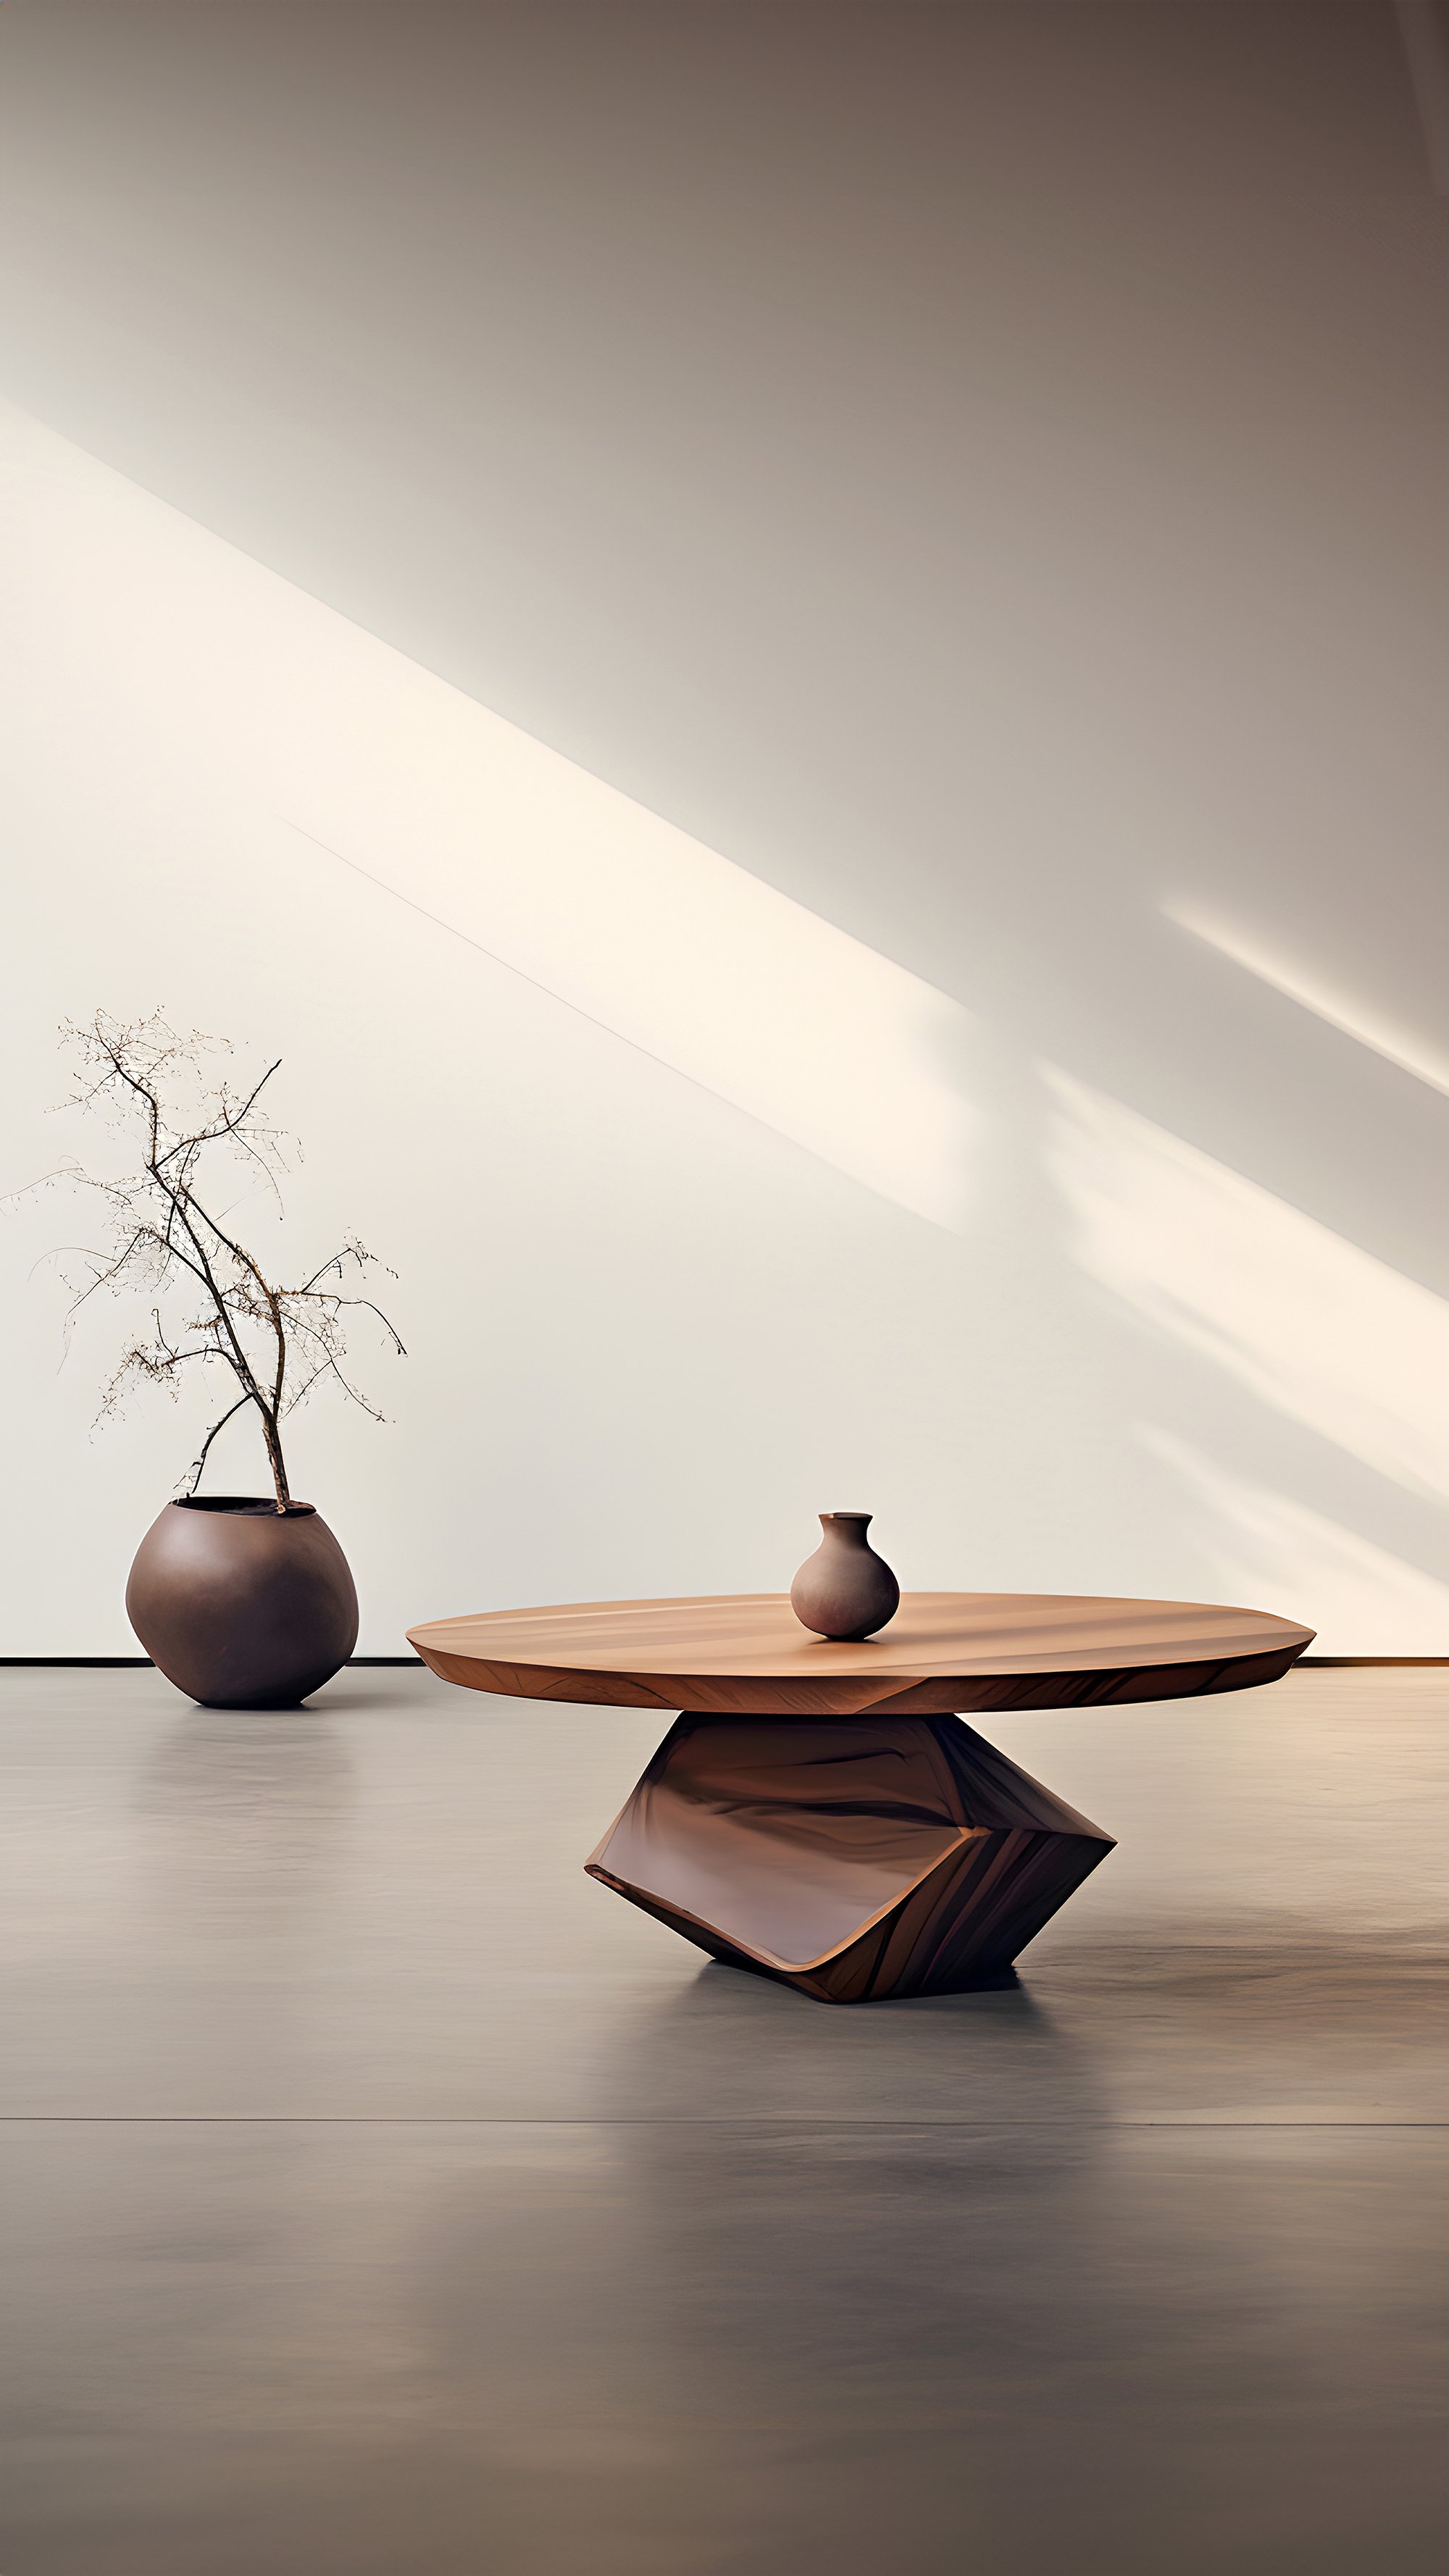 Sculptural Coffee Table Made of Solid Wood, Center Table Solace S43 by Joel Escalona — 9.jpg